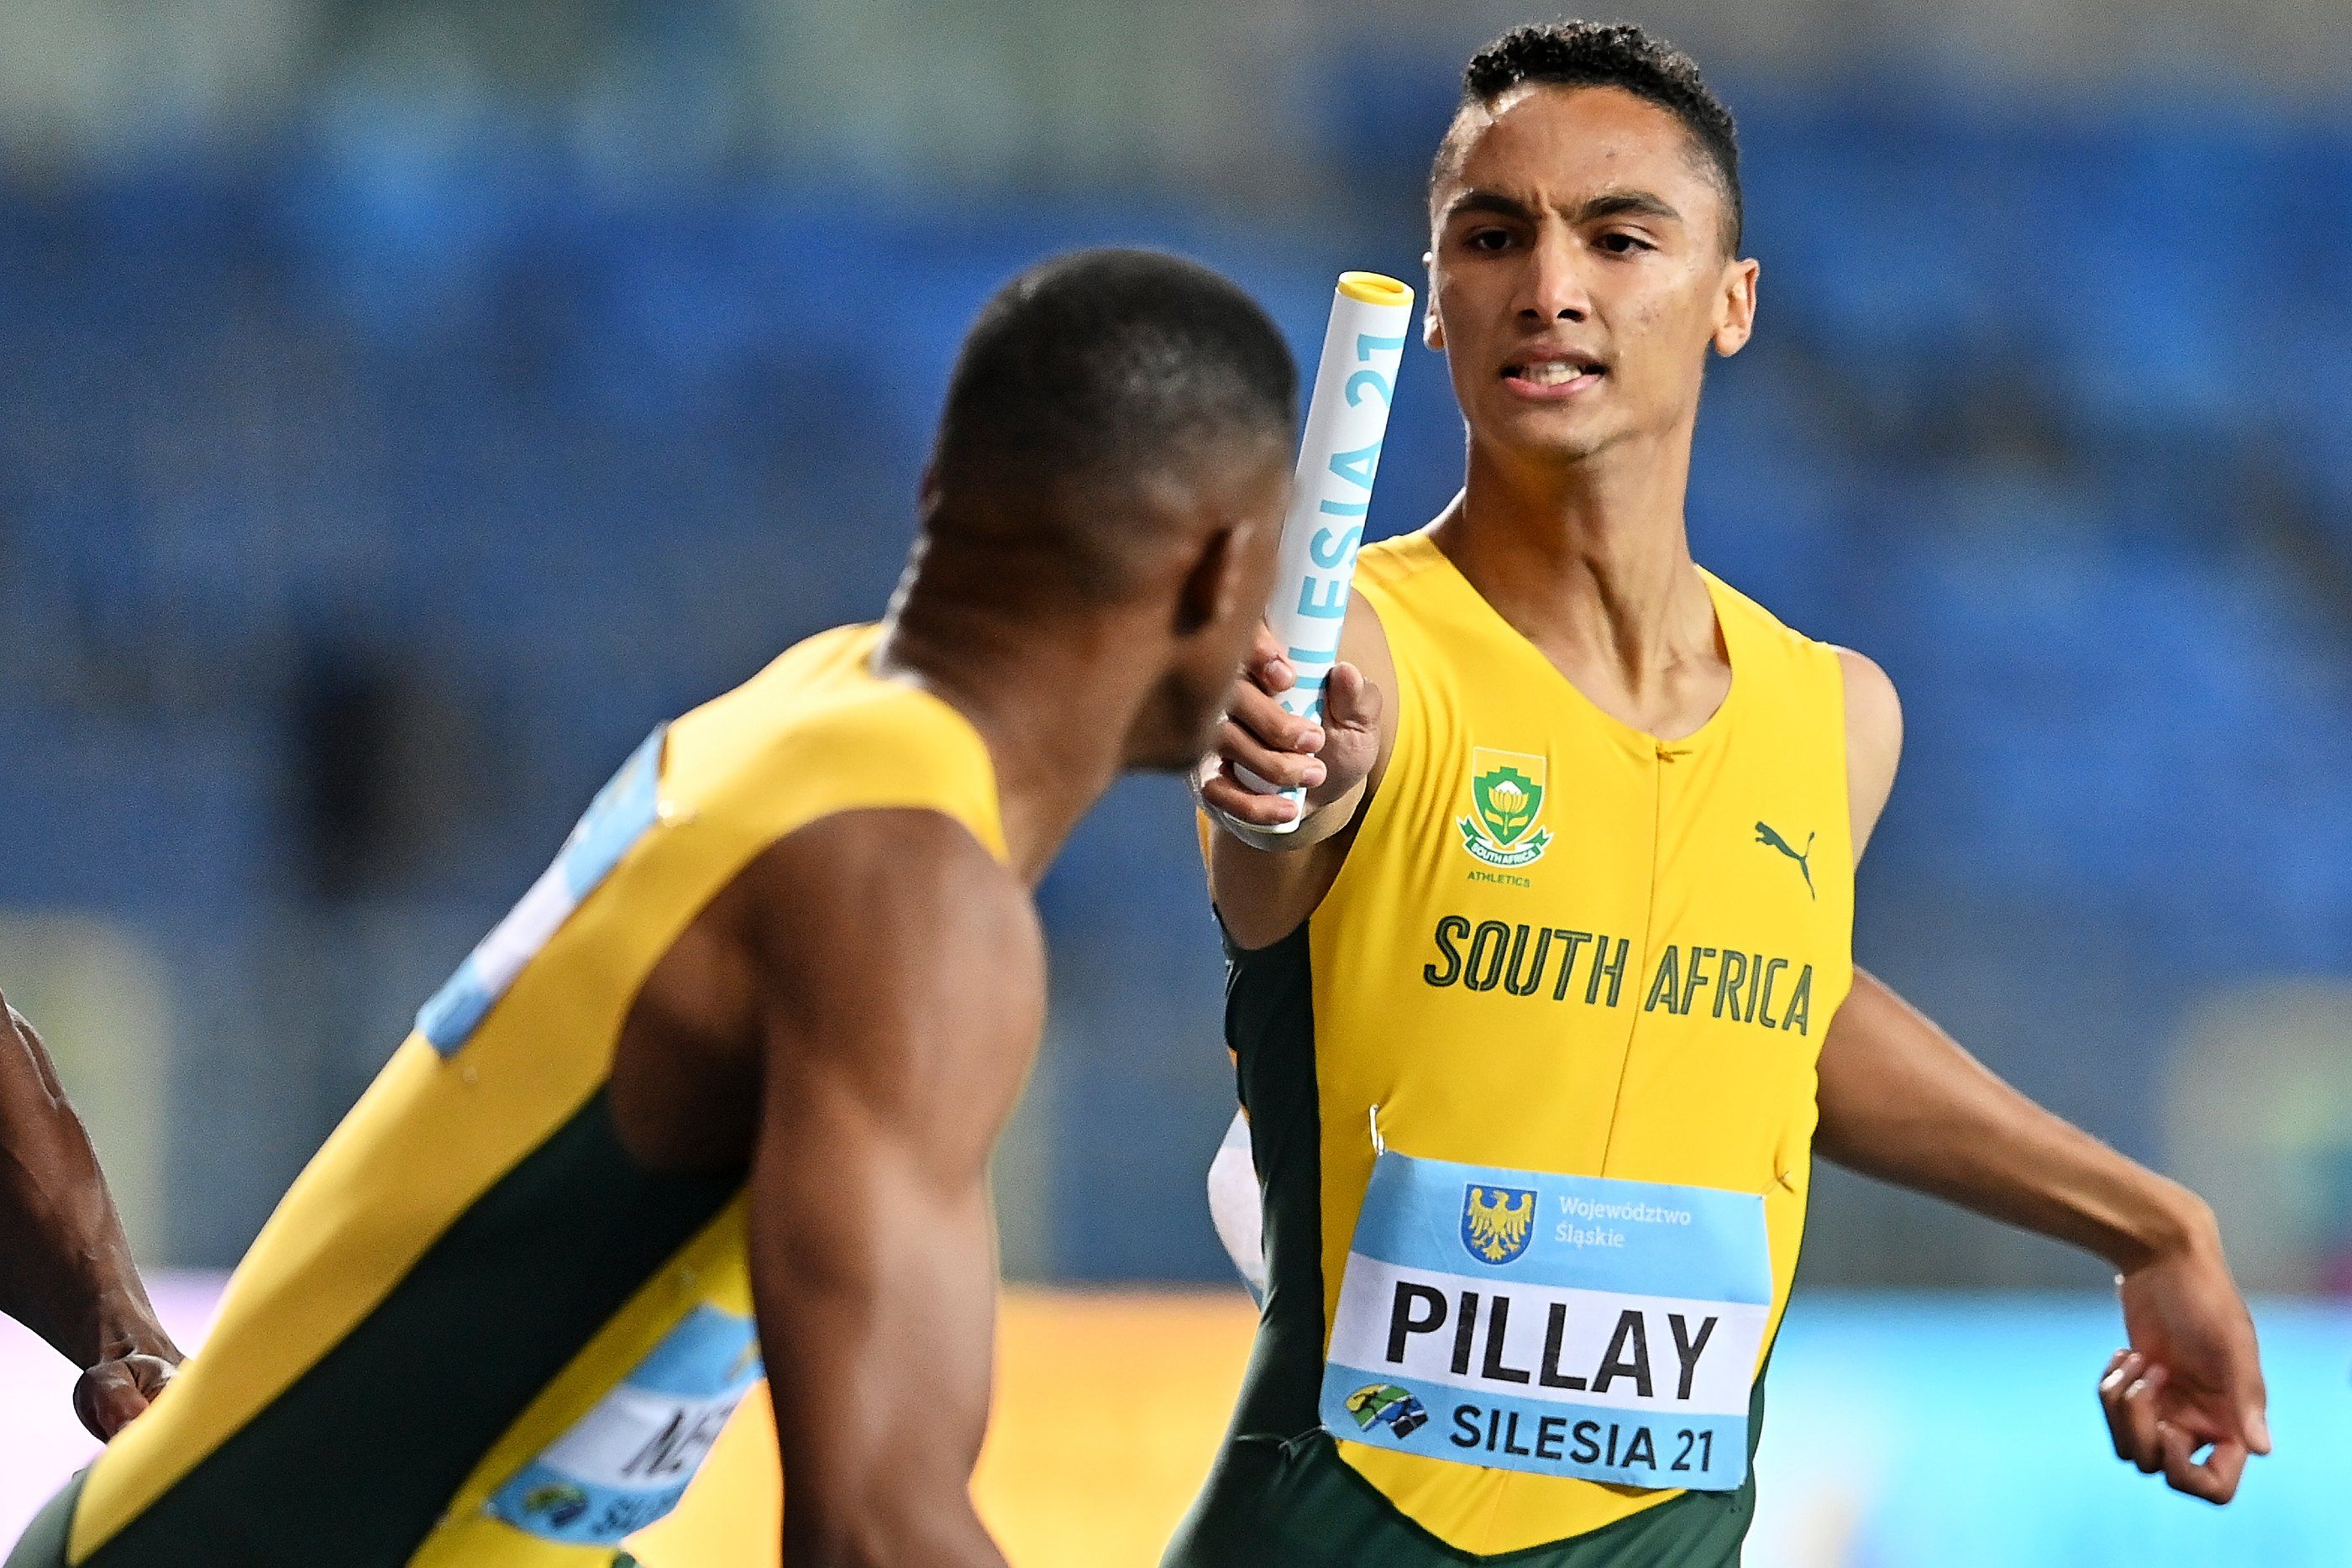 Lythe Pillay competes at the World Athletics Relays Silesia21